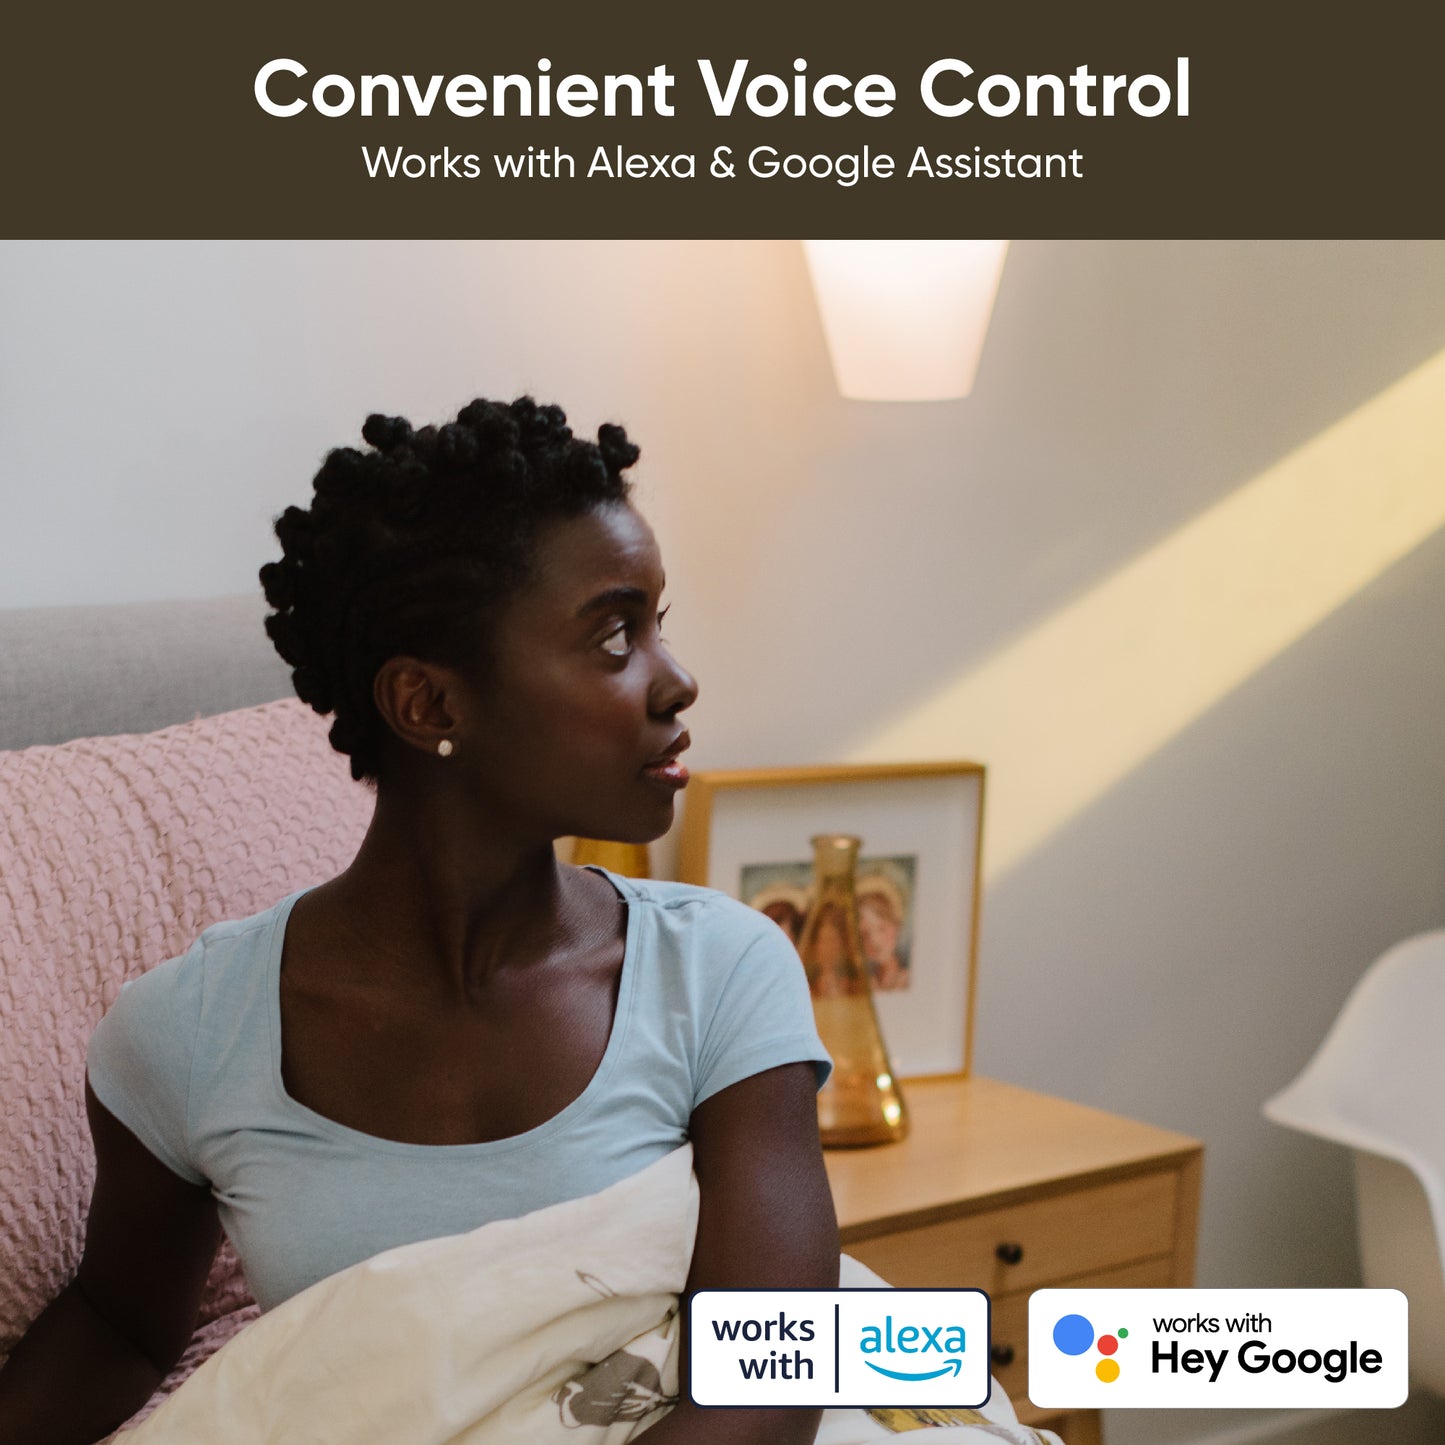 Woman in bed with the room lit with warm lighting. White text overlay that says "Works with Alexa & Google Assistant."